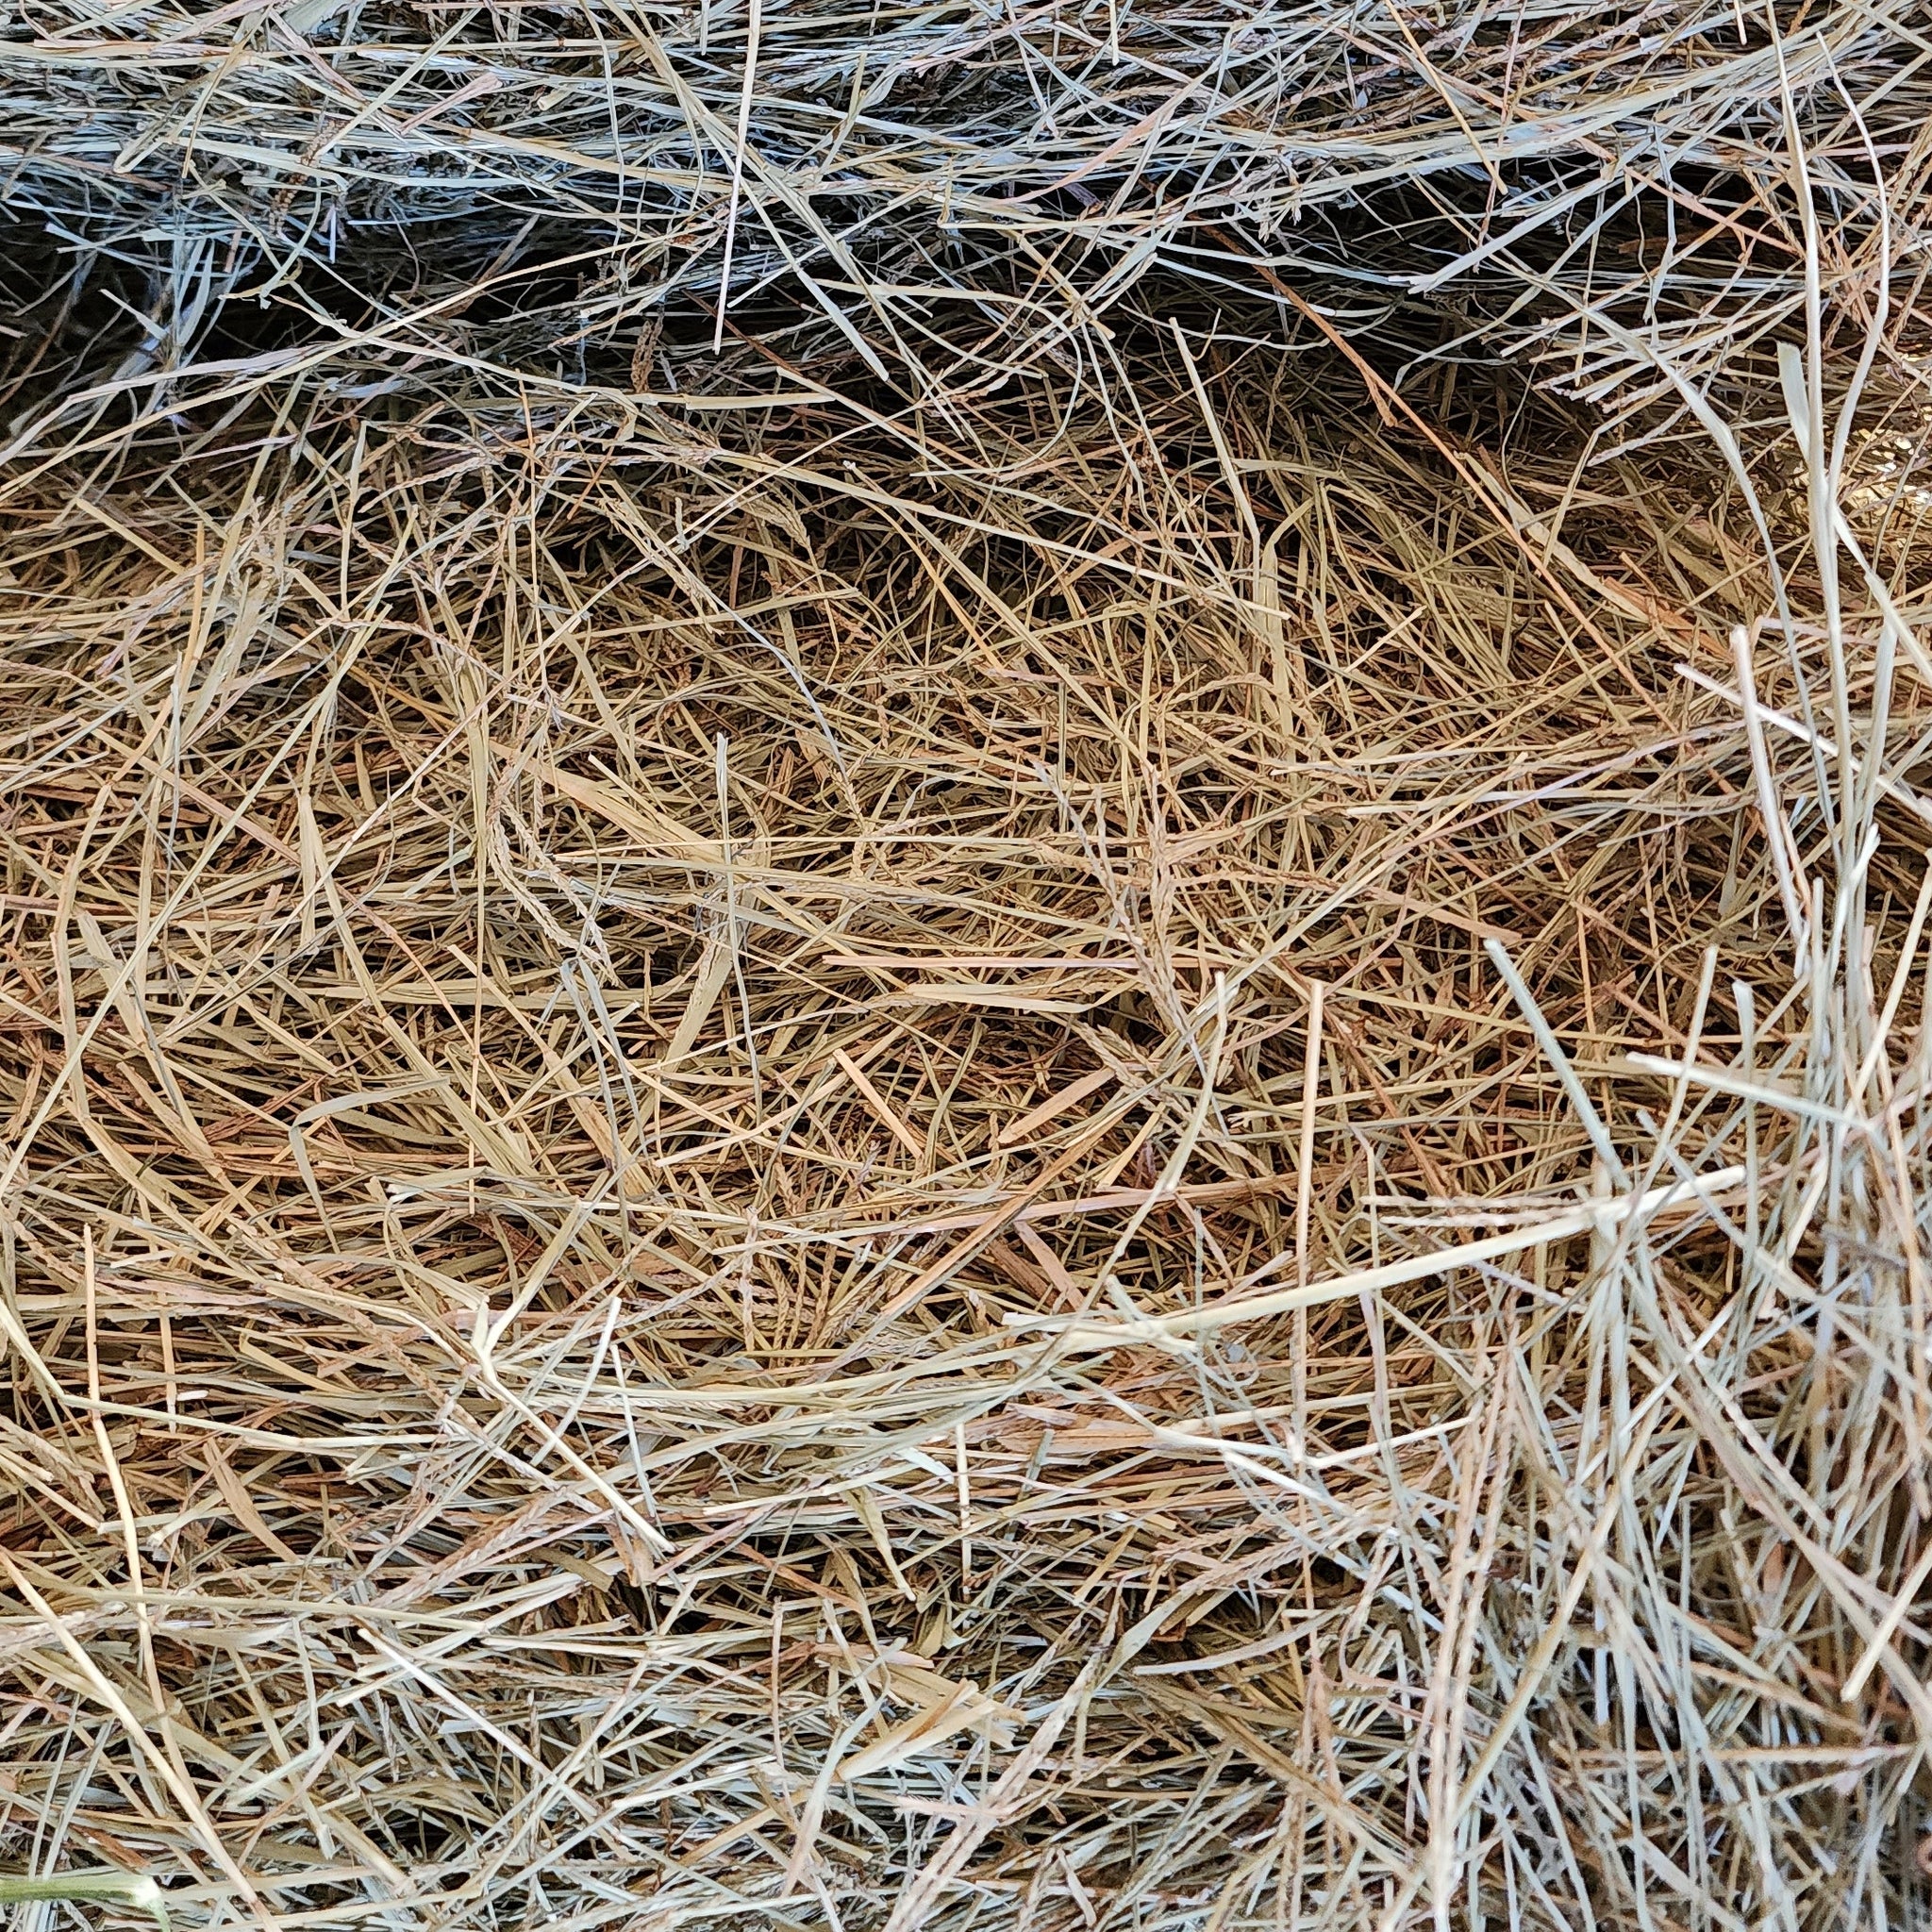 How to Identify Common Grass Hay (Timothy and Orchard)